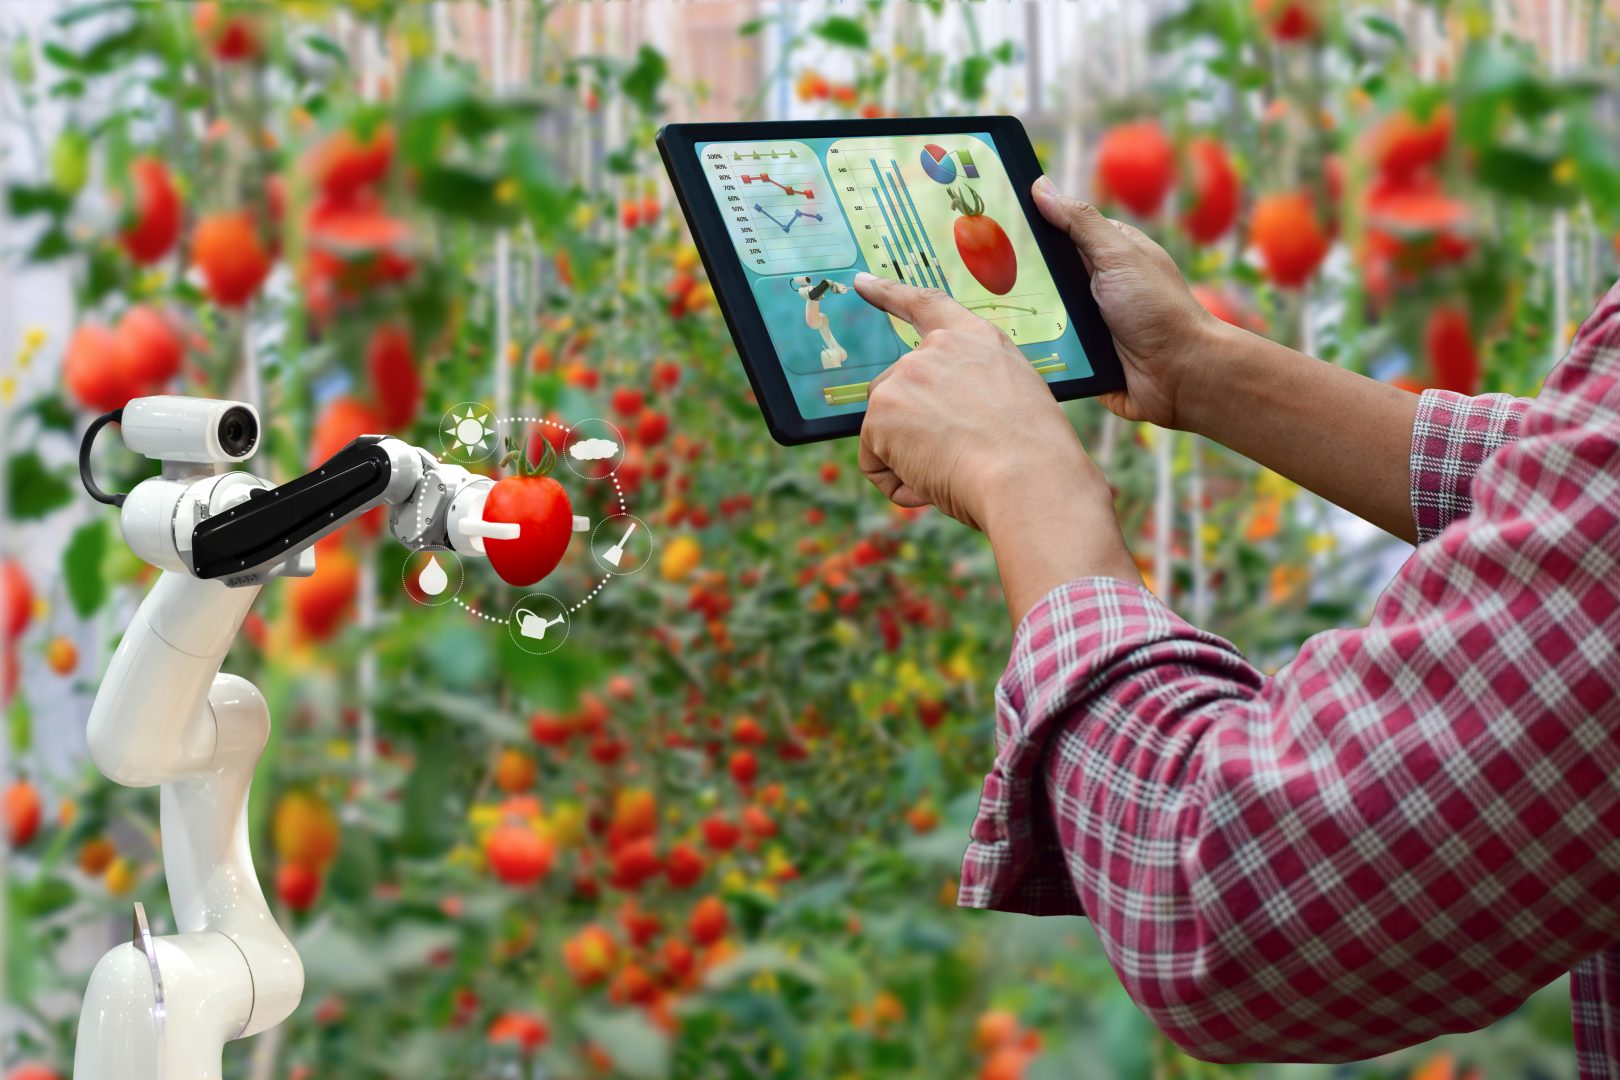 farmer using TeamViewer IoT in agriculture software to control robot arm to harvest tomatoes